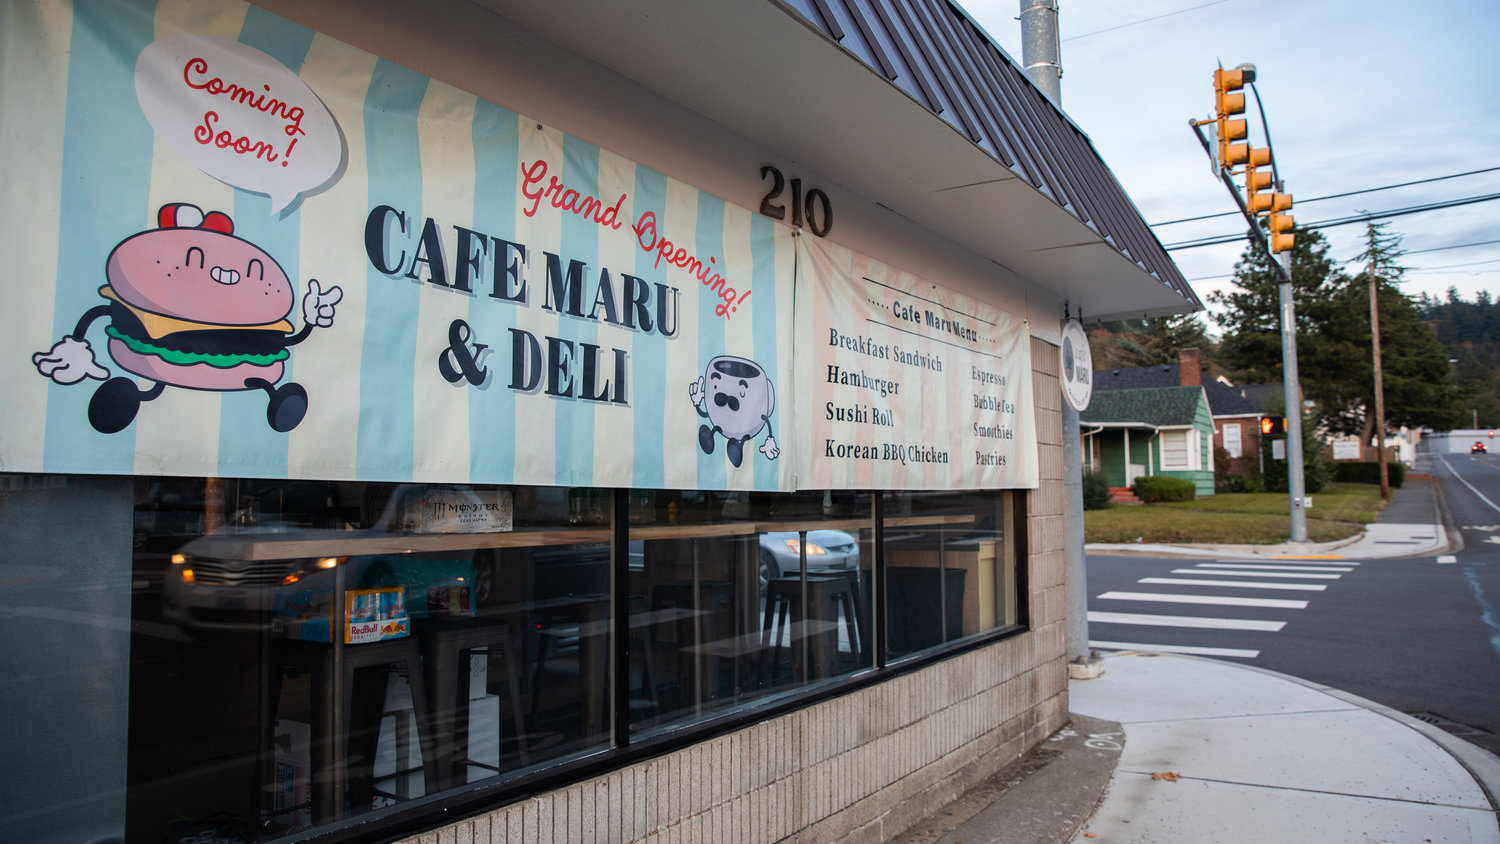 Cafe Maru & Deli located at 210 W. Main St. in downtown Chehalis, is expected to be open on Tuesday from 7 a.m. to 5 p.m.